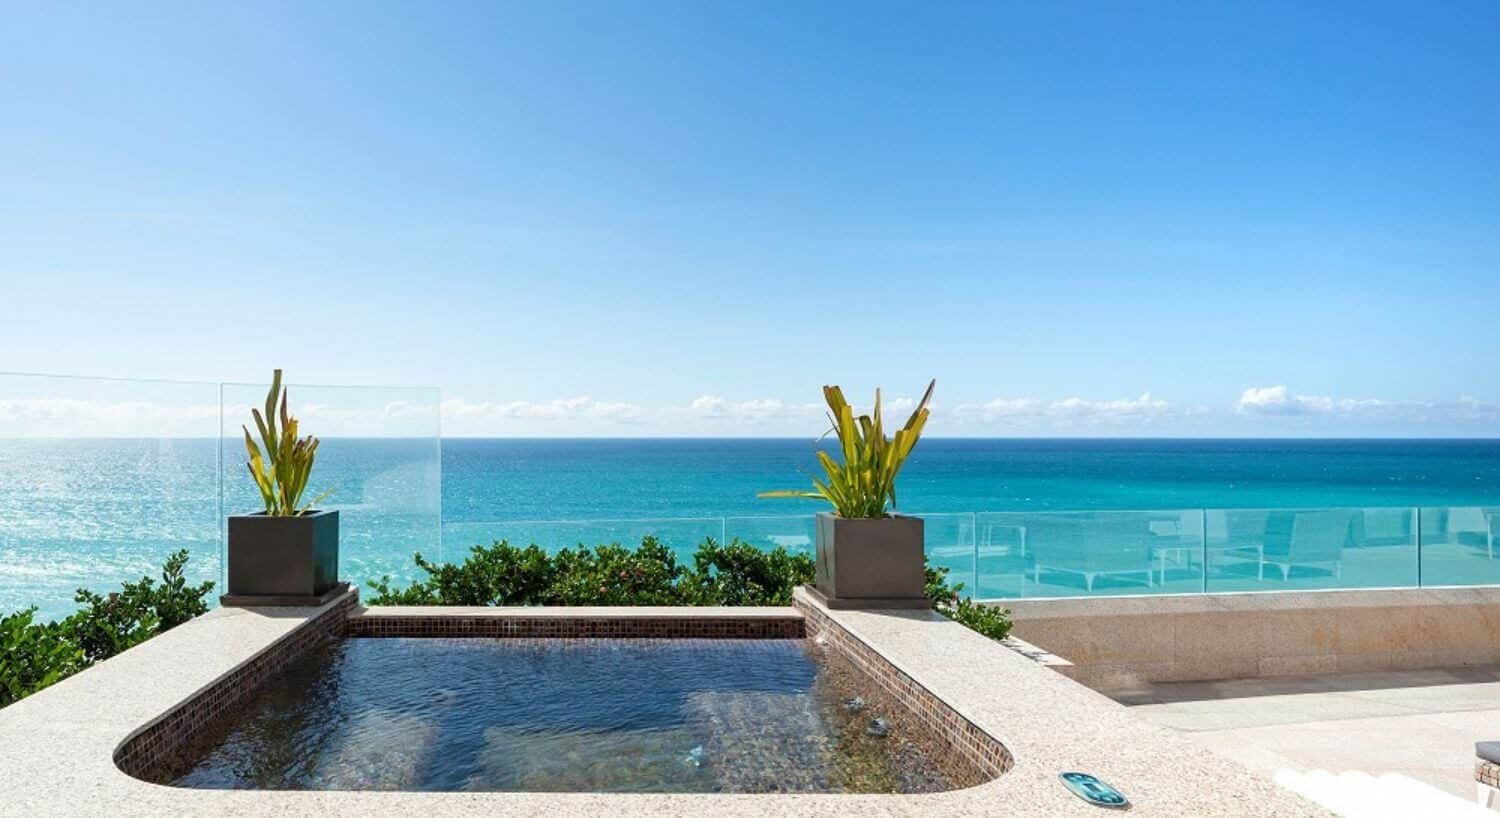 A balcony with a jacuzzi and sweeping turquoise ocean views.